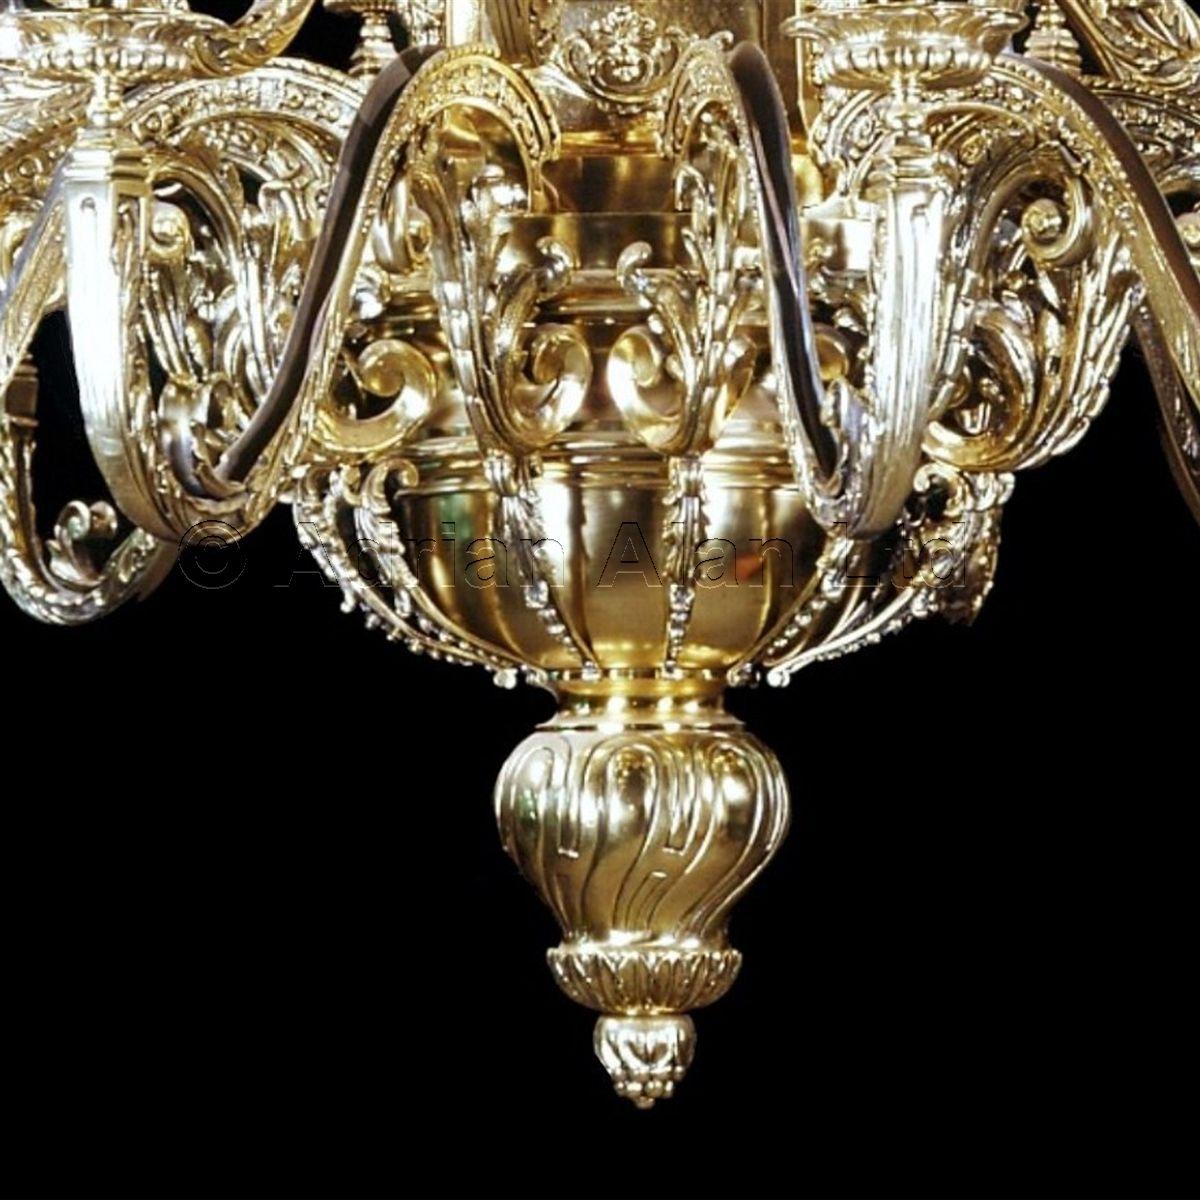 A Large Gilt-Bronze Regence Style Thirty-Branch Chandelier